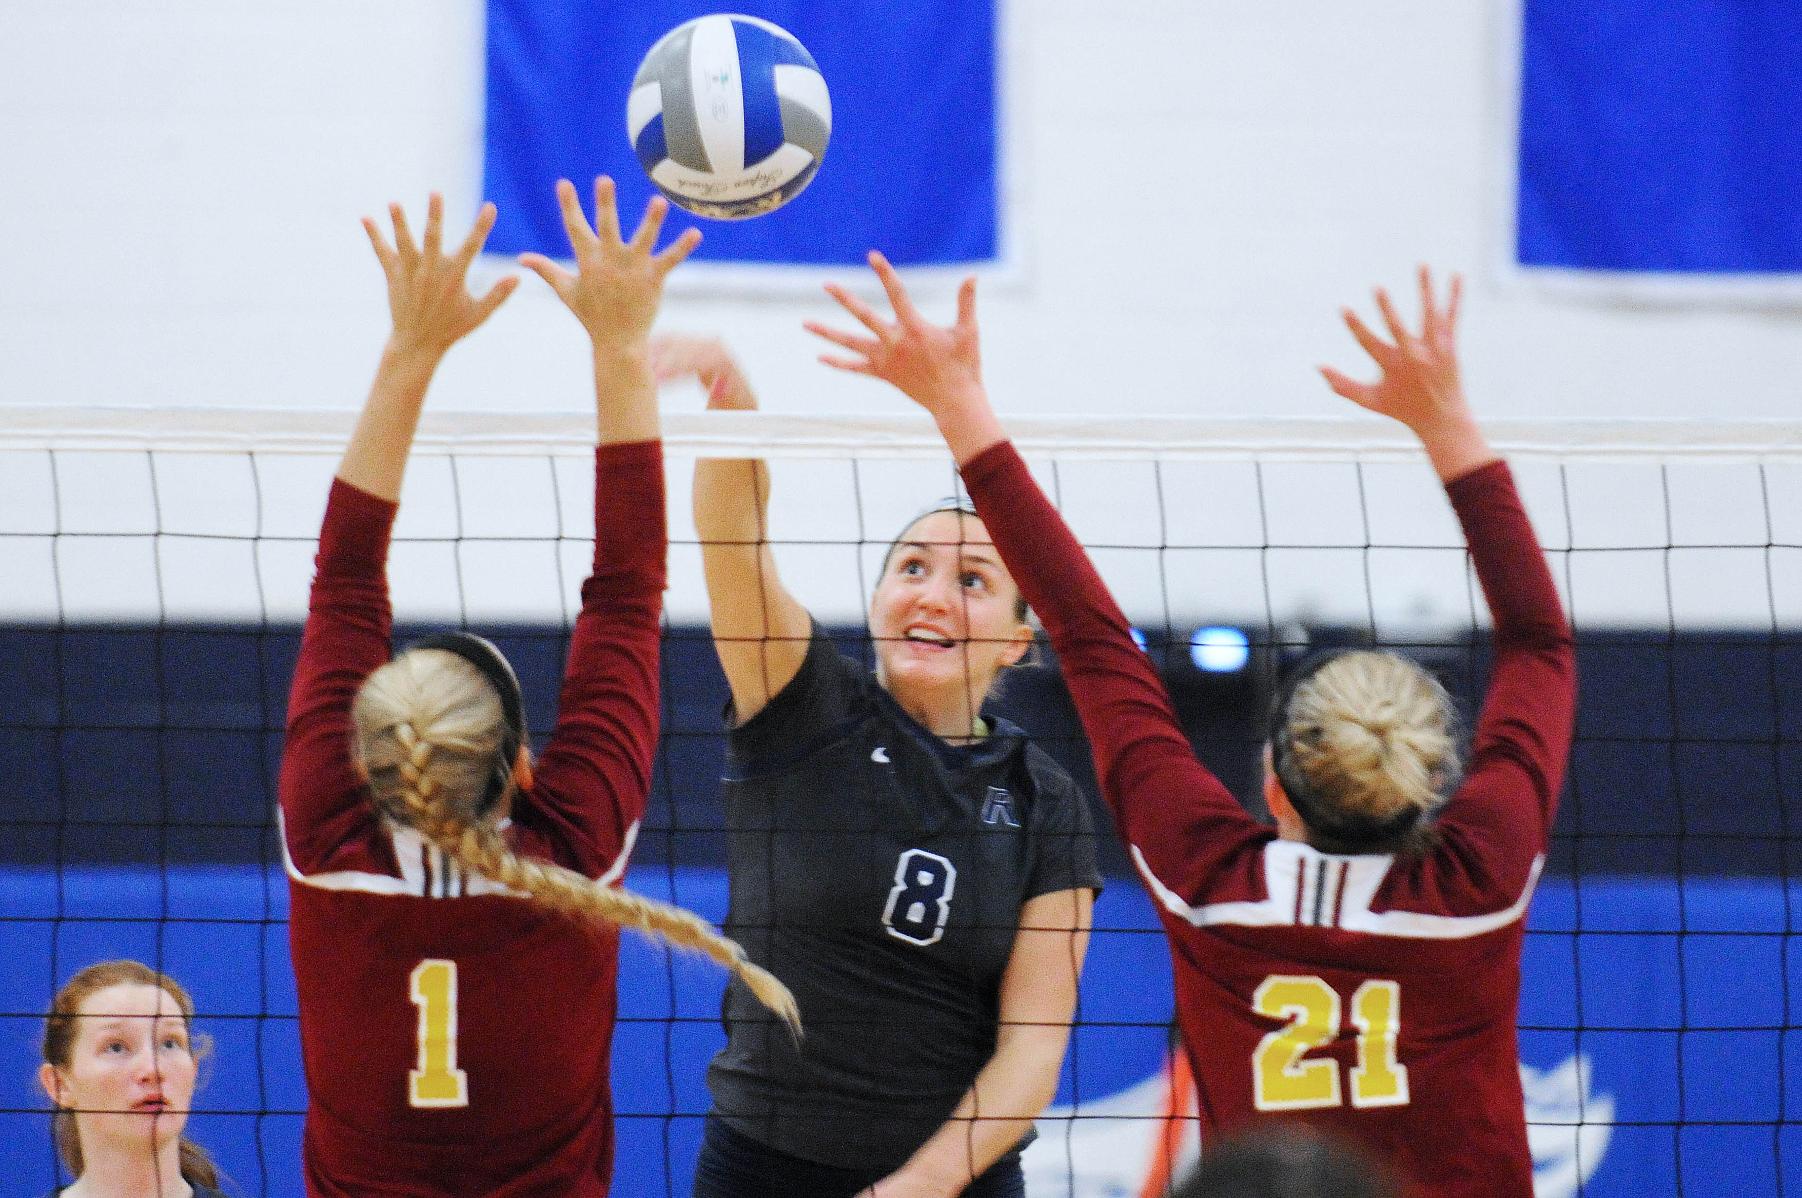 Women's Volleyball downed by Babson, 3-0